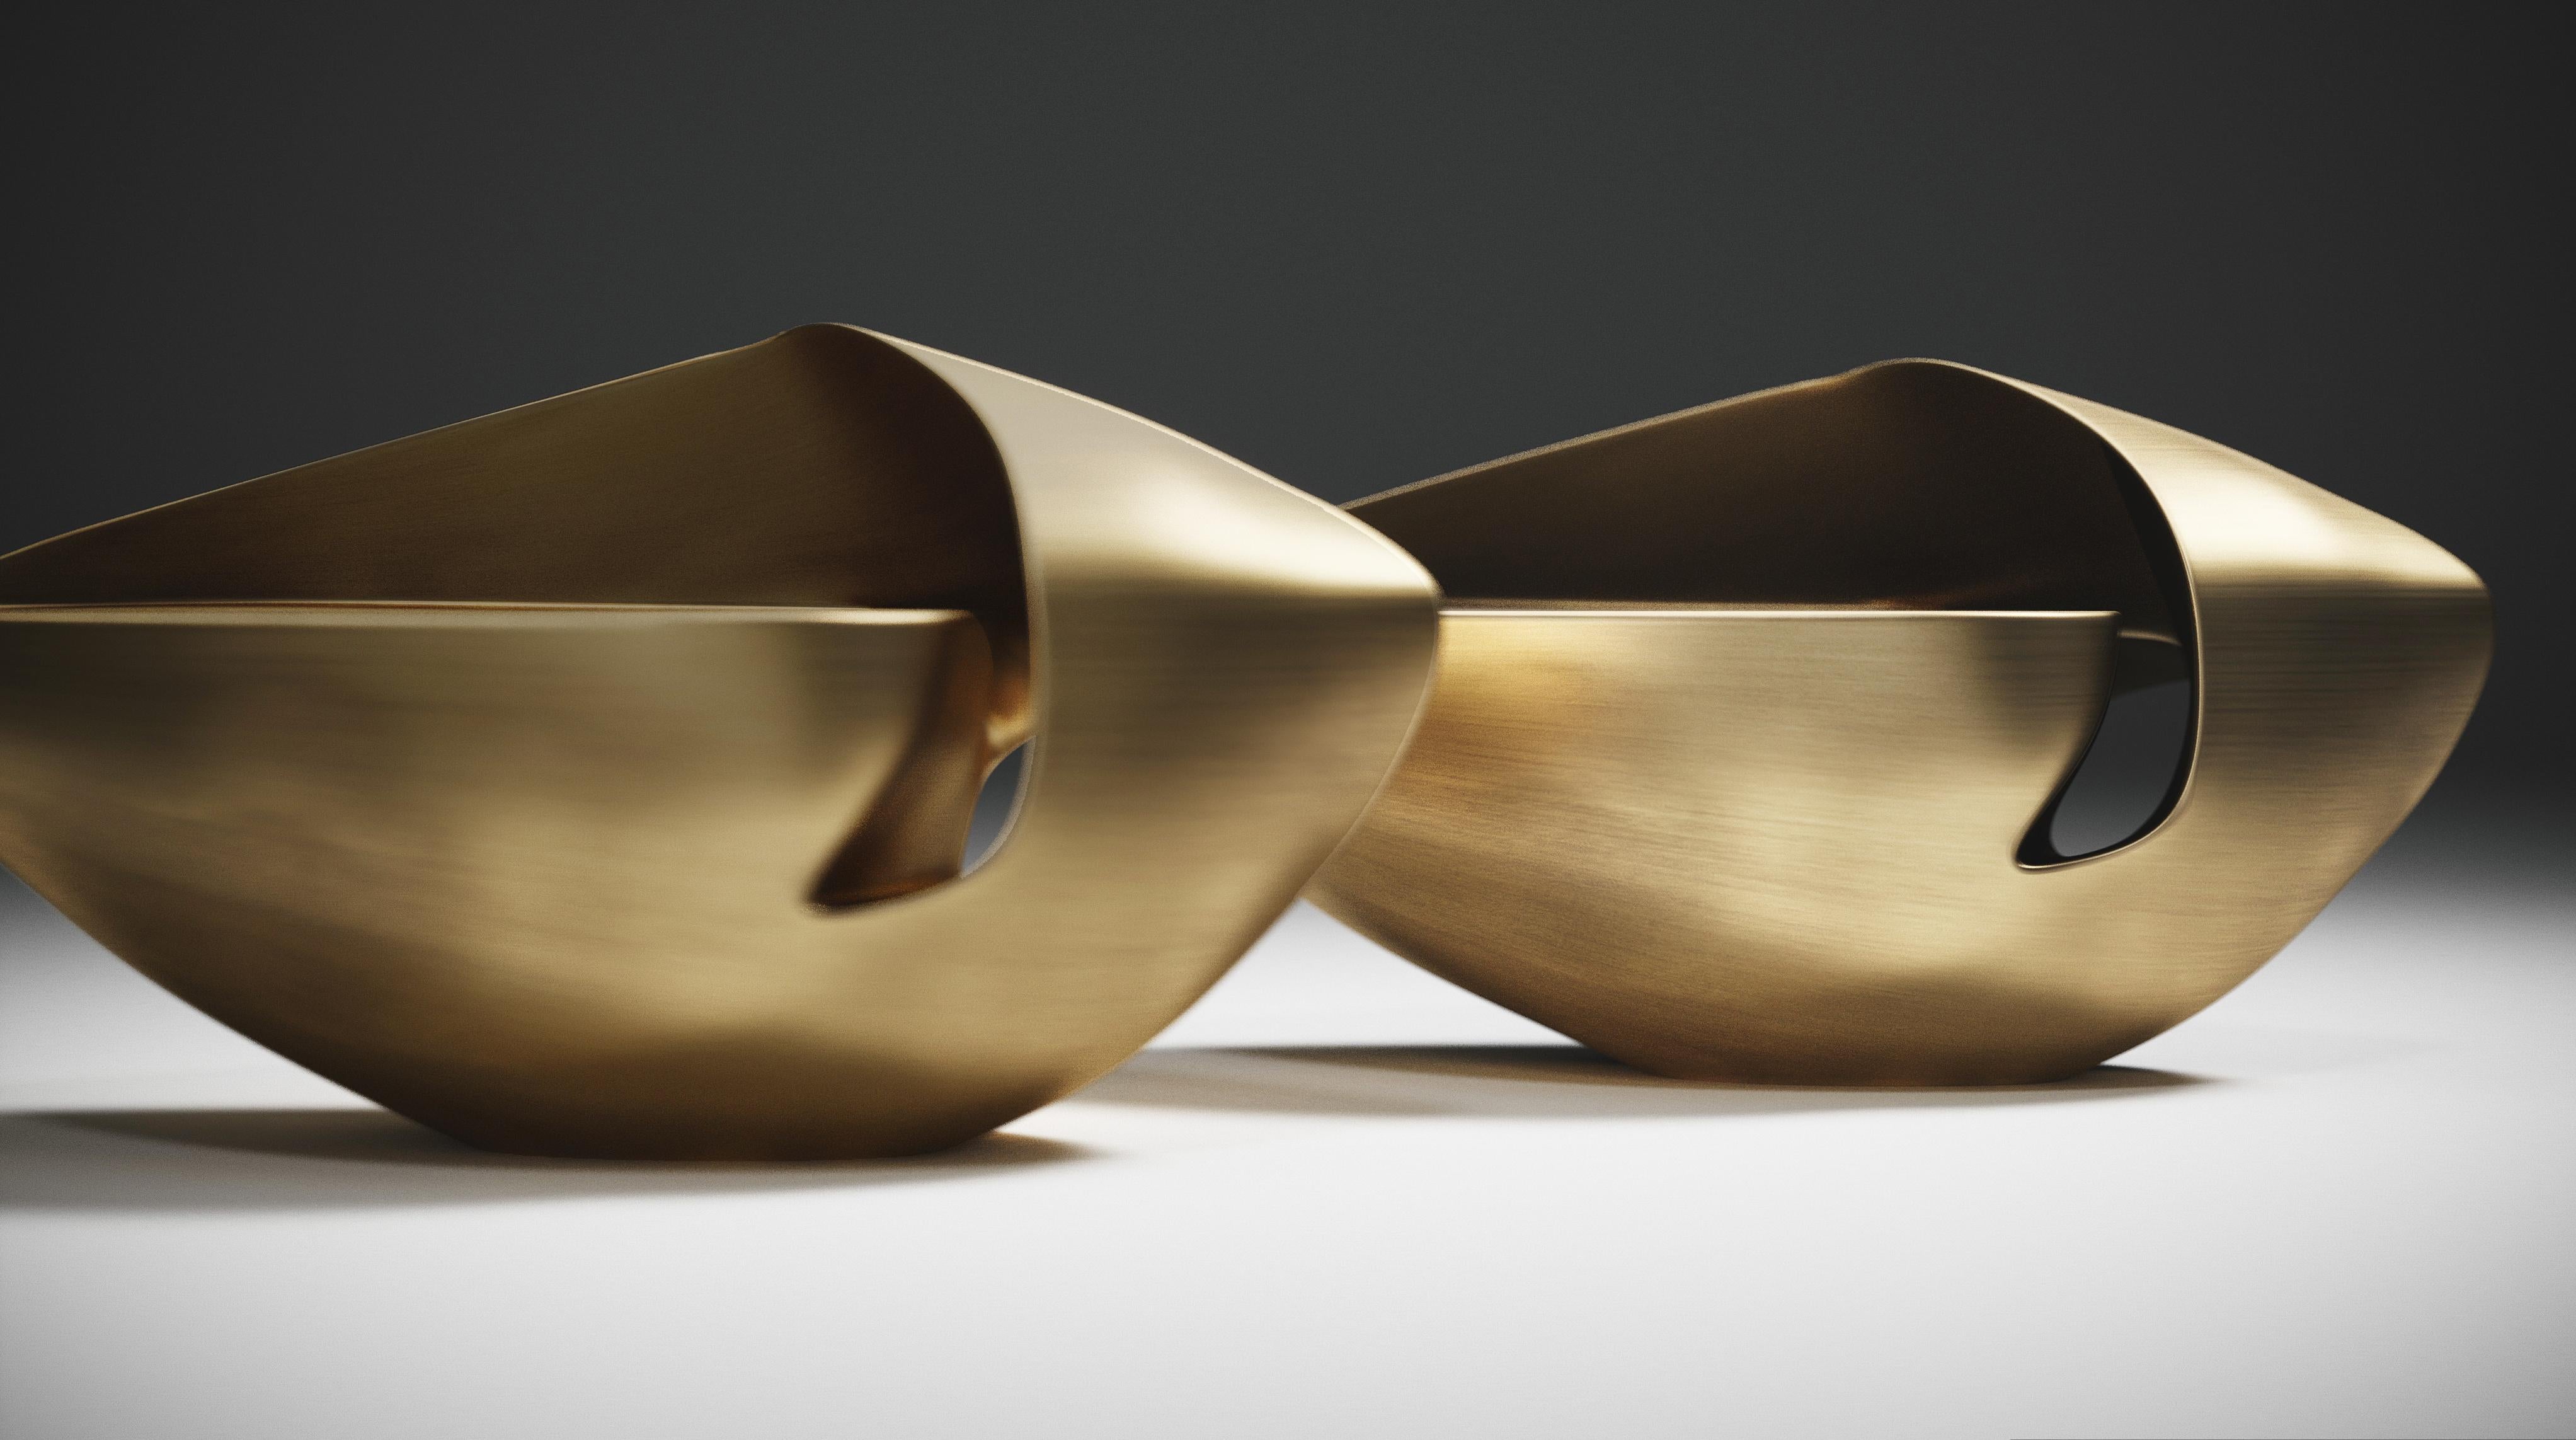 Patrick Coard Paris launches a unique and beautiful sculptural object collection. The Kings Brother cutout is organic and ethereal in its design, with its beautiful curvatures and grooves. Available in bronze-patina brass or two-tone bronze-patina